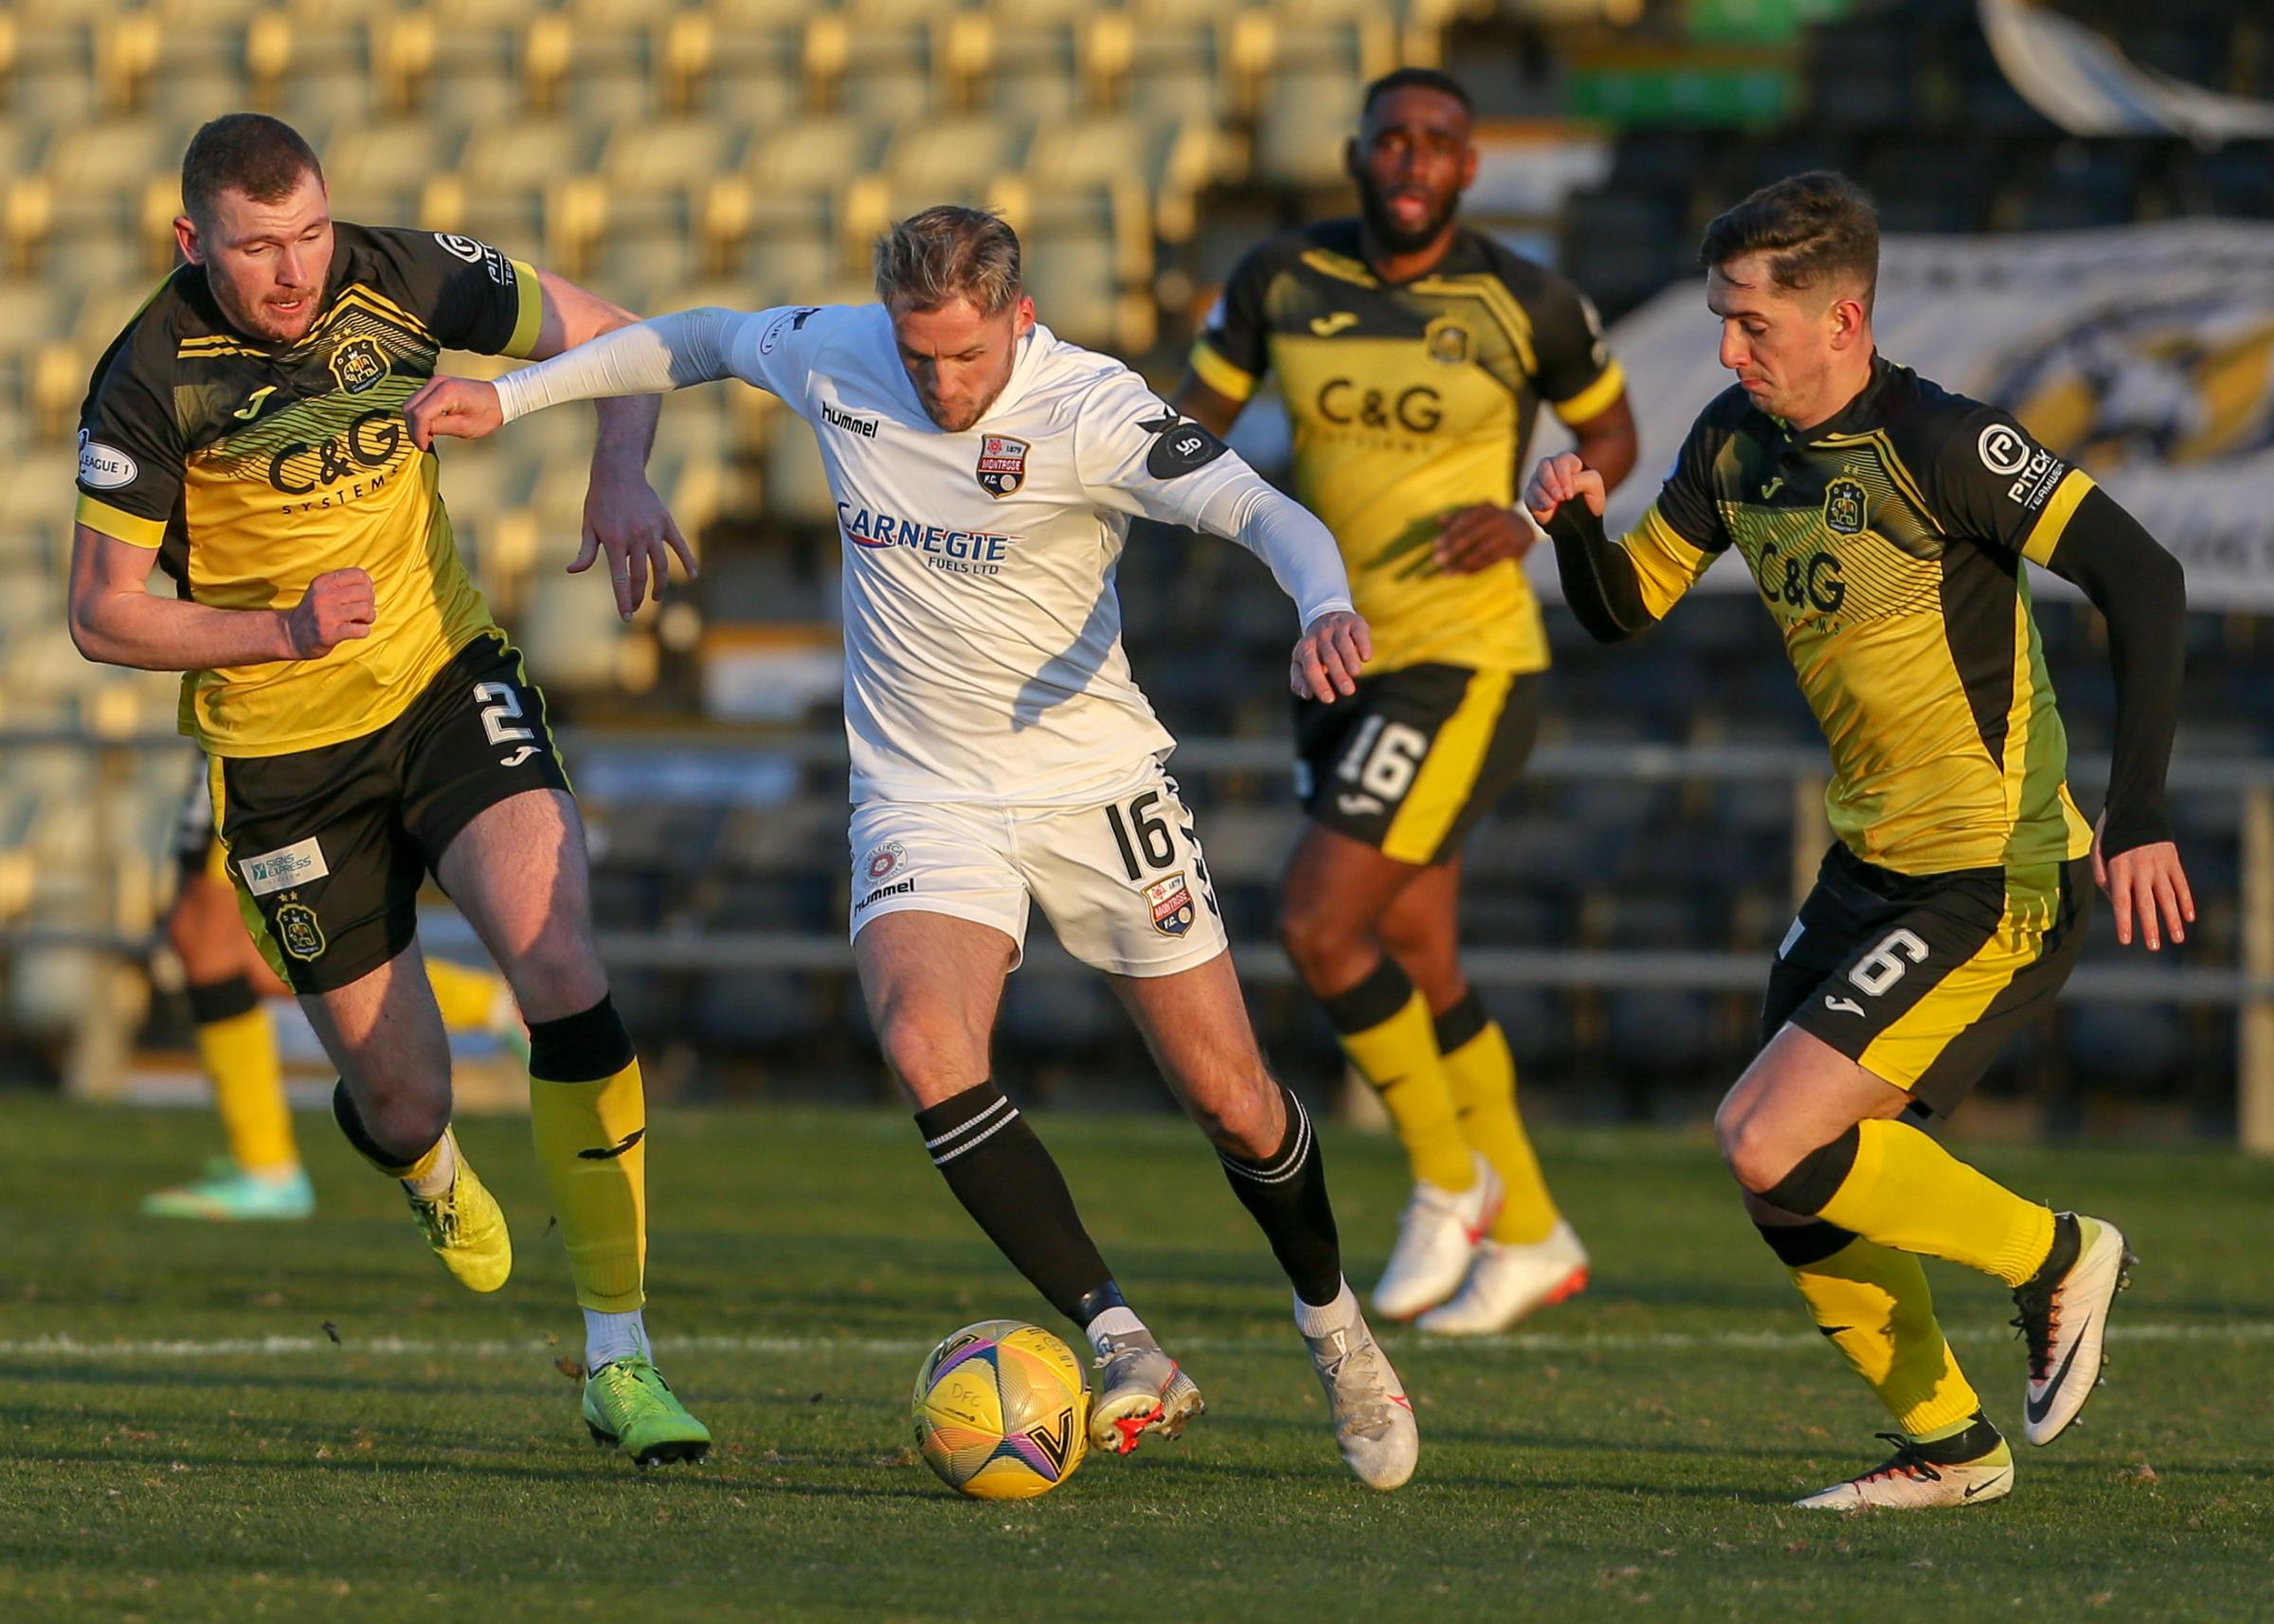 Dumbarton remain in the League One relegation play-off spot despite holding the divisions top scorers to a 0-0 draw on April 6 (Photo - Andy Scott)